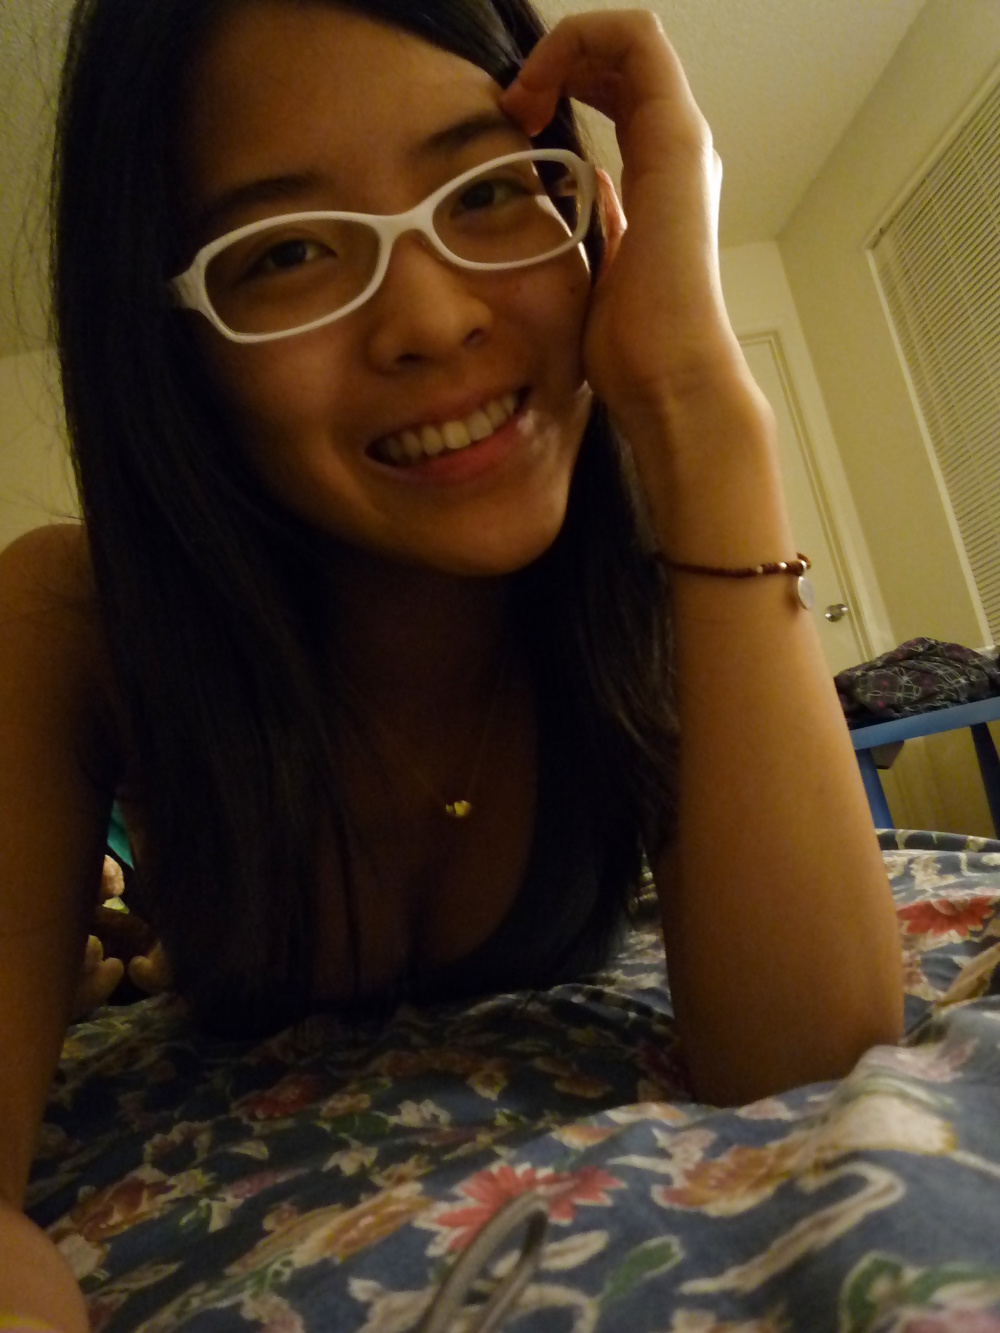 Sexy asian teen with glasses #30188331